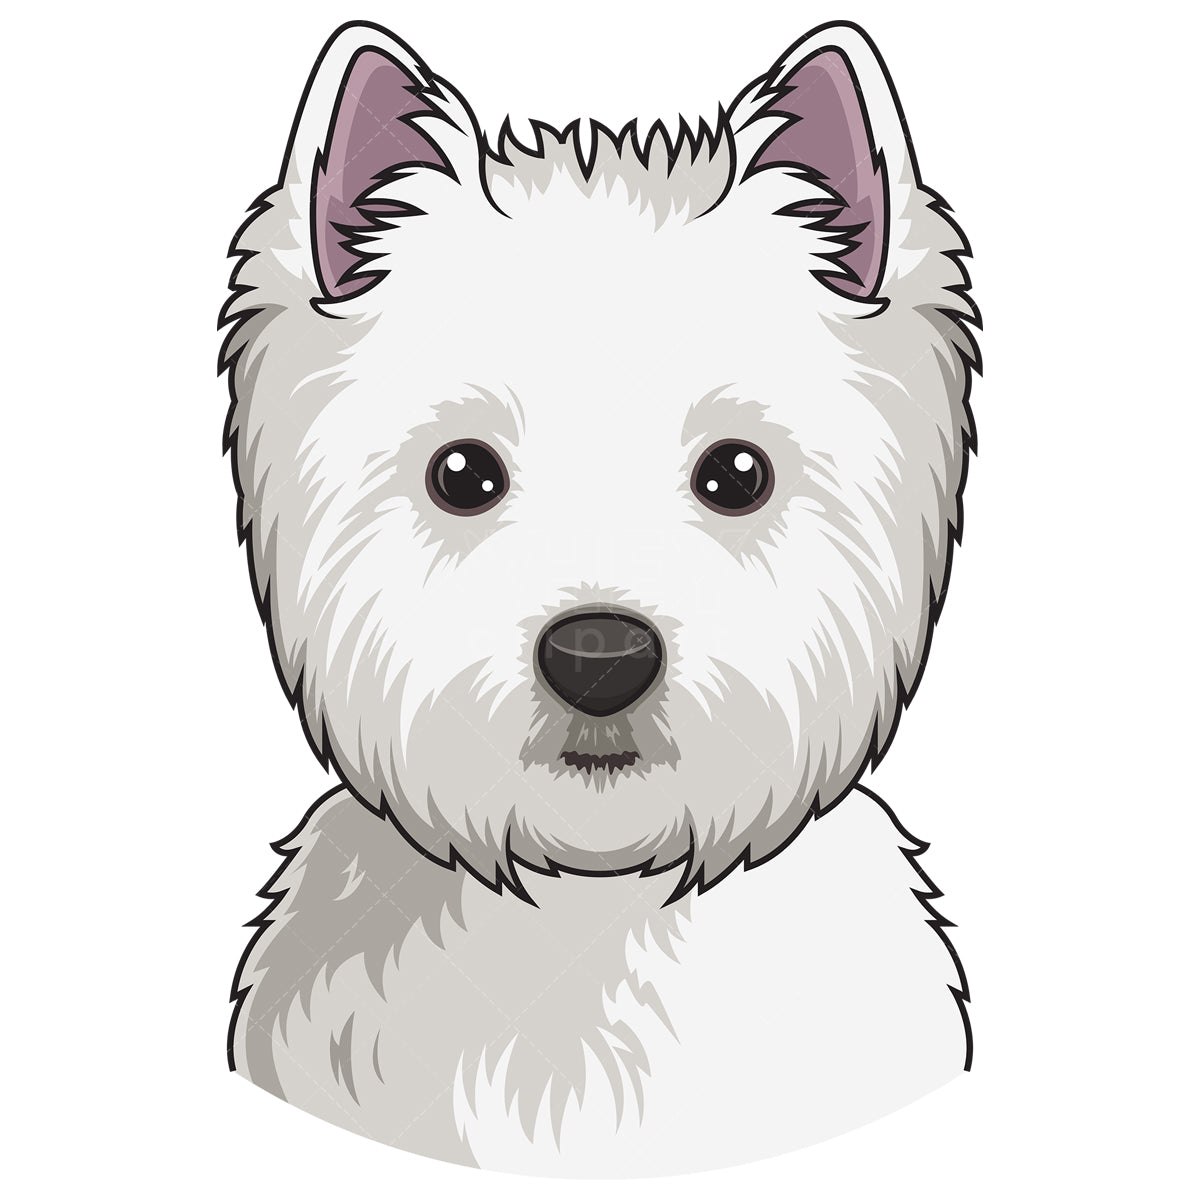 Royalty-free stock vector illustration of a west highland white terrier face.